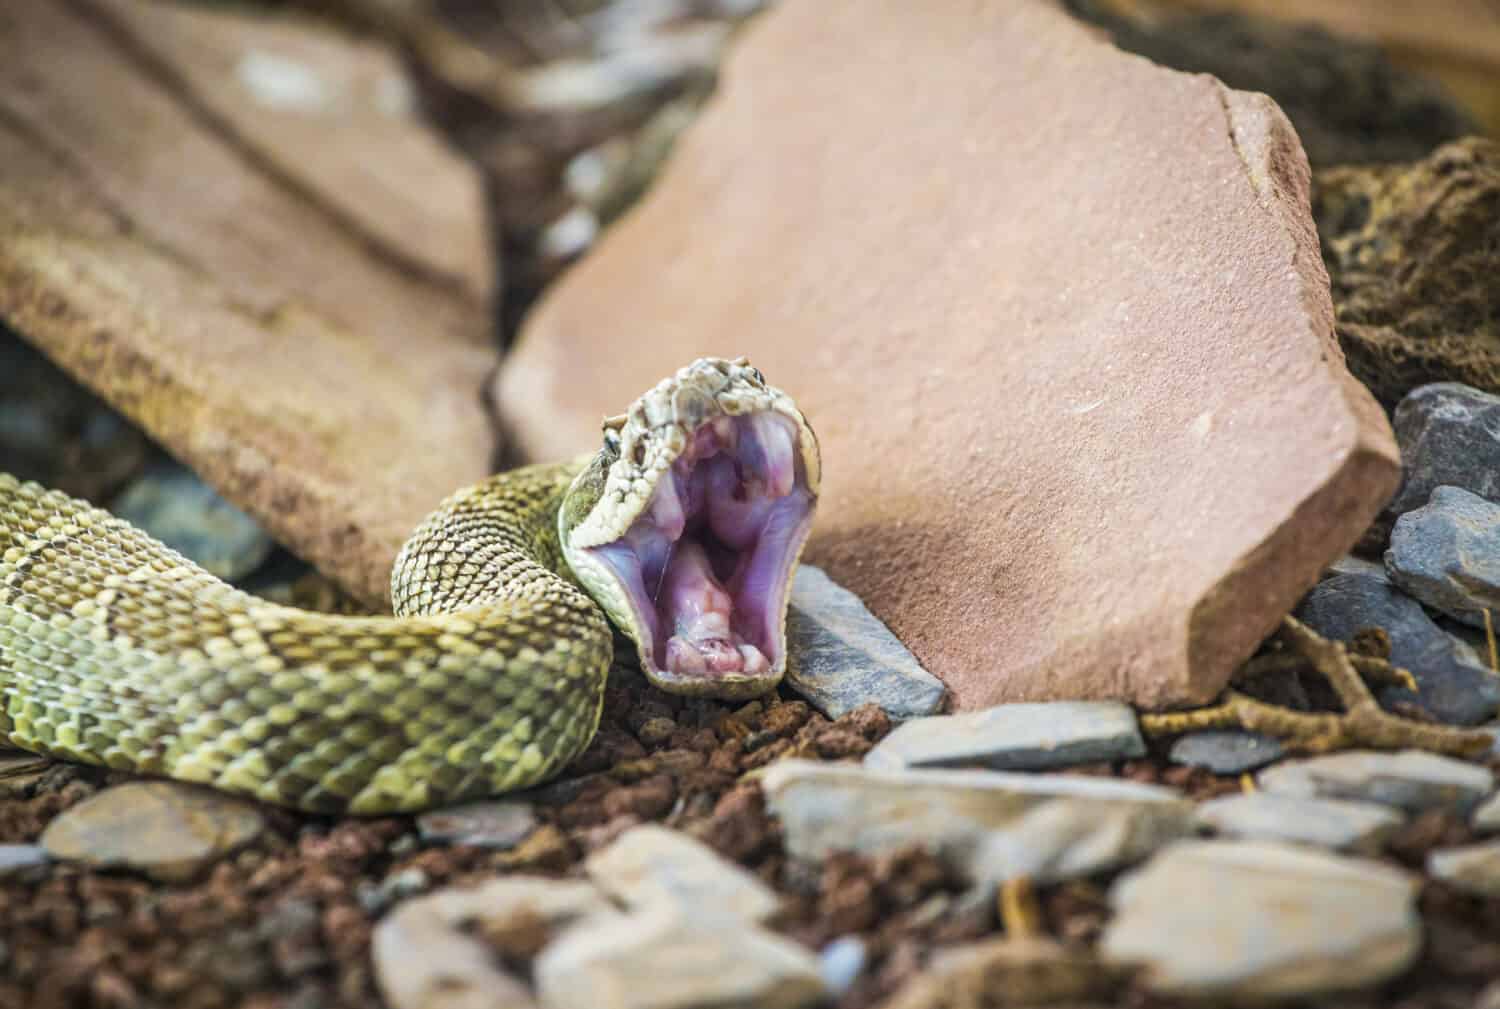 A rattlesnake (Crotalus oreganus) ready to bite / attack, showing his snake's fangs